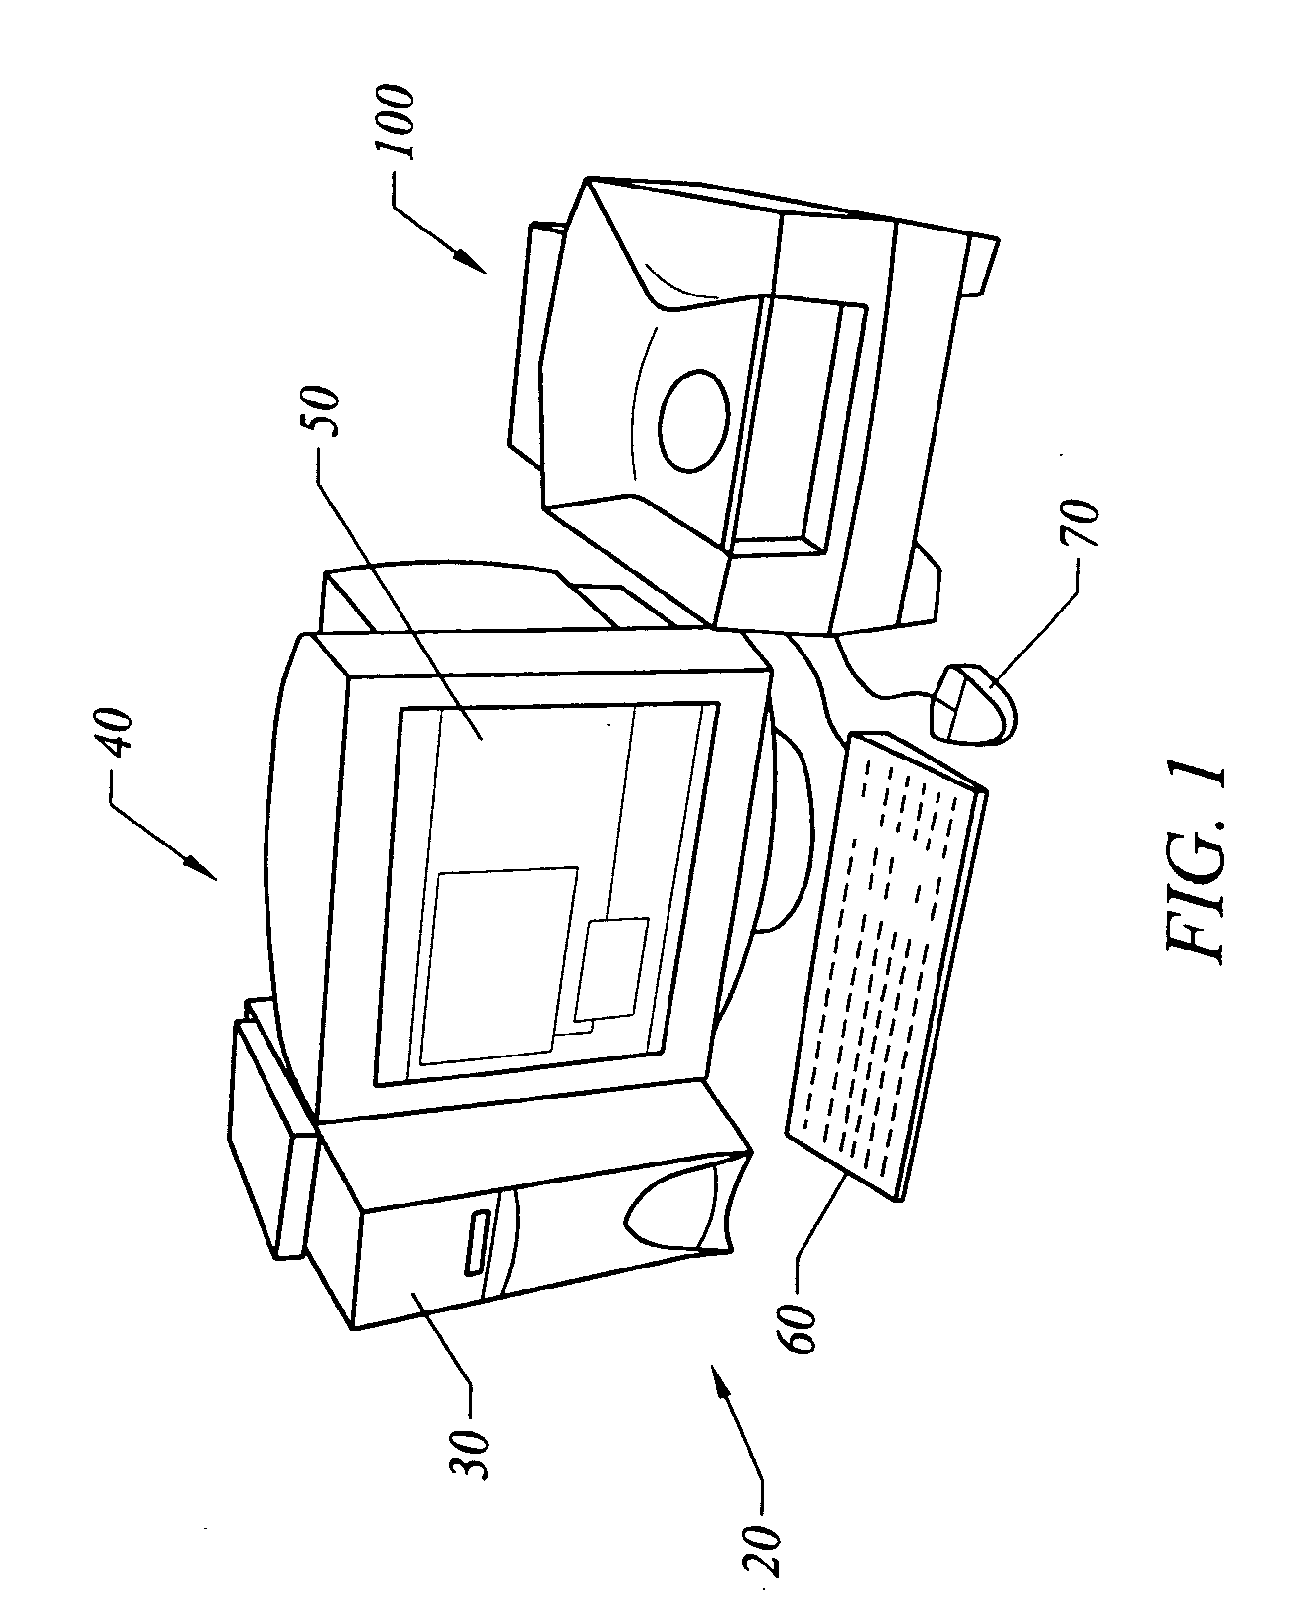 Method and apparatus for normalization and deconvolution of assay data